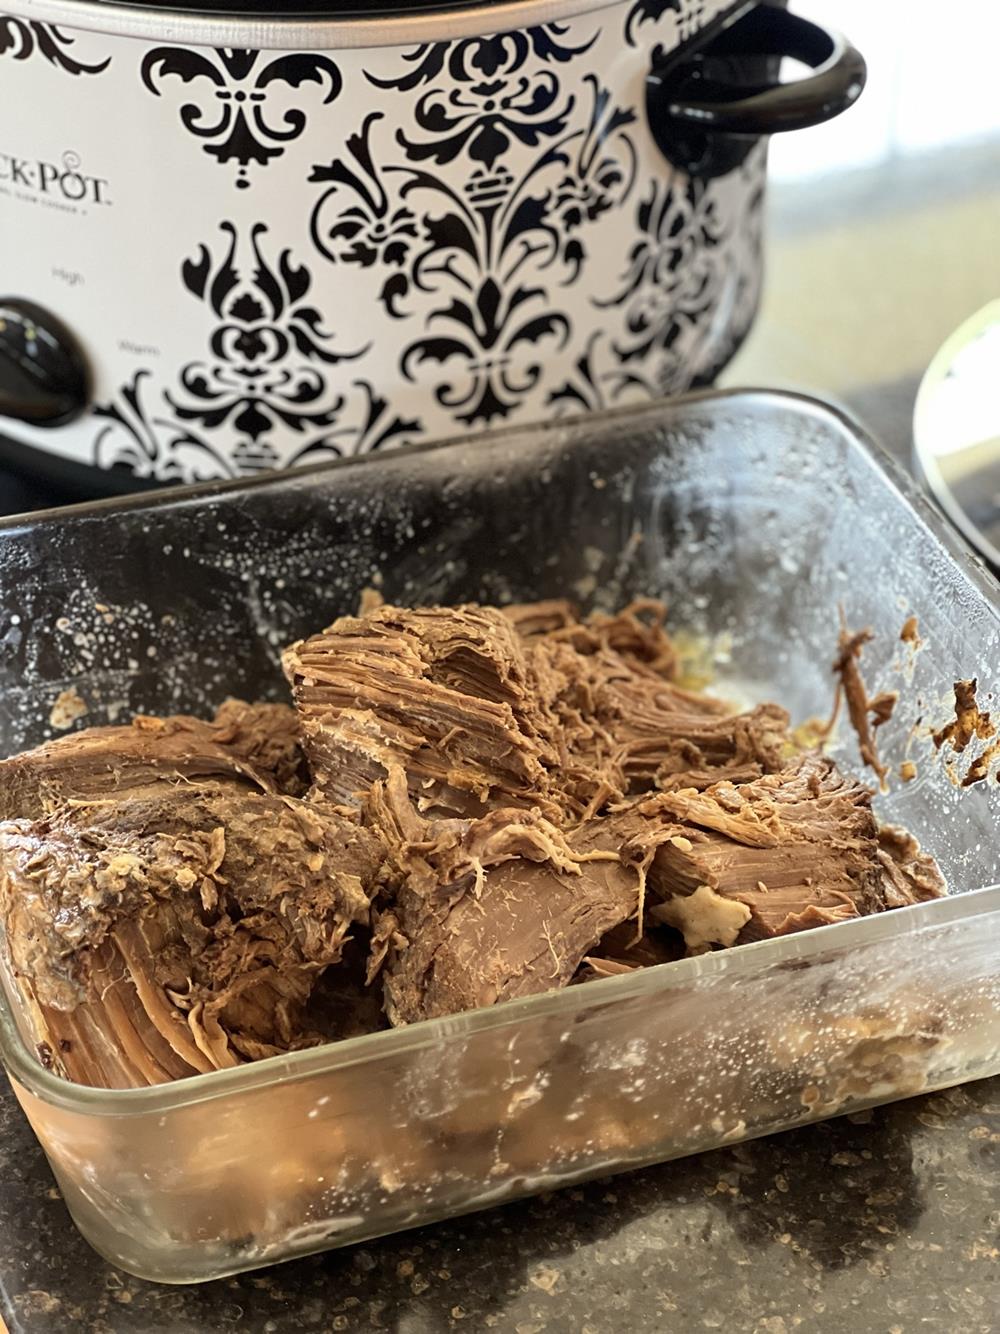 BBQ beef in glass dish with crockpot in background